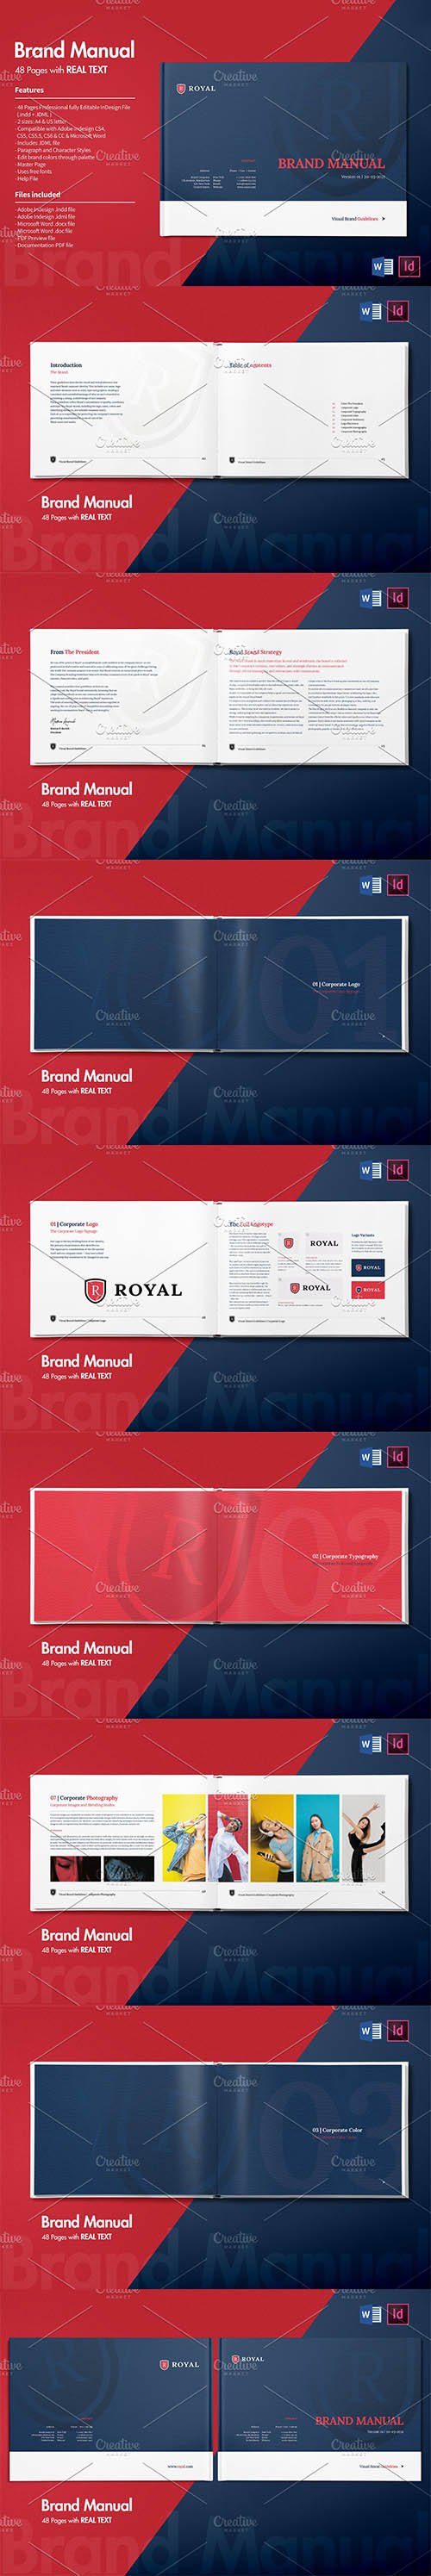 CreativeMarket - Brand Manual 48 Pages - REAL TEXT - 4229788